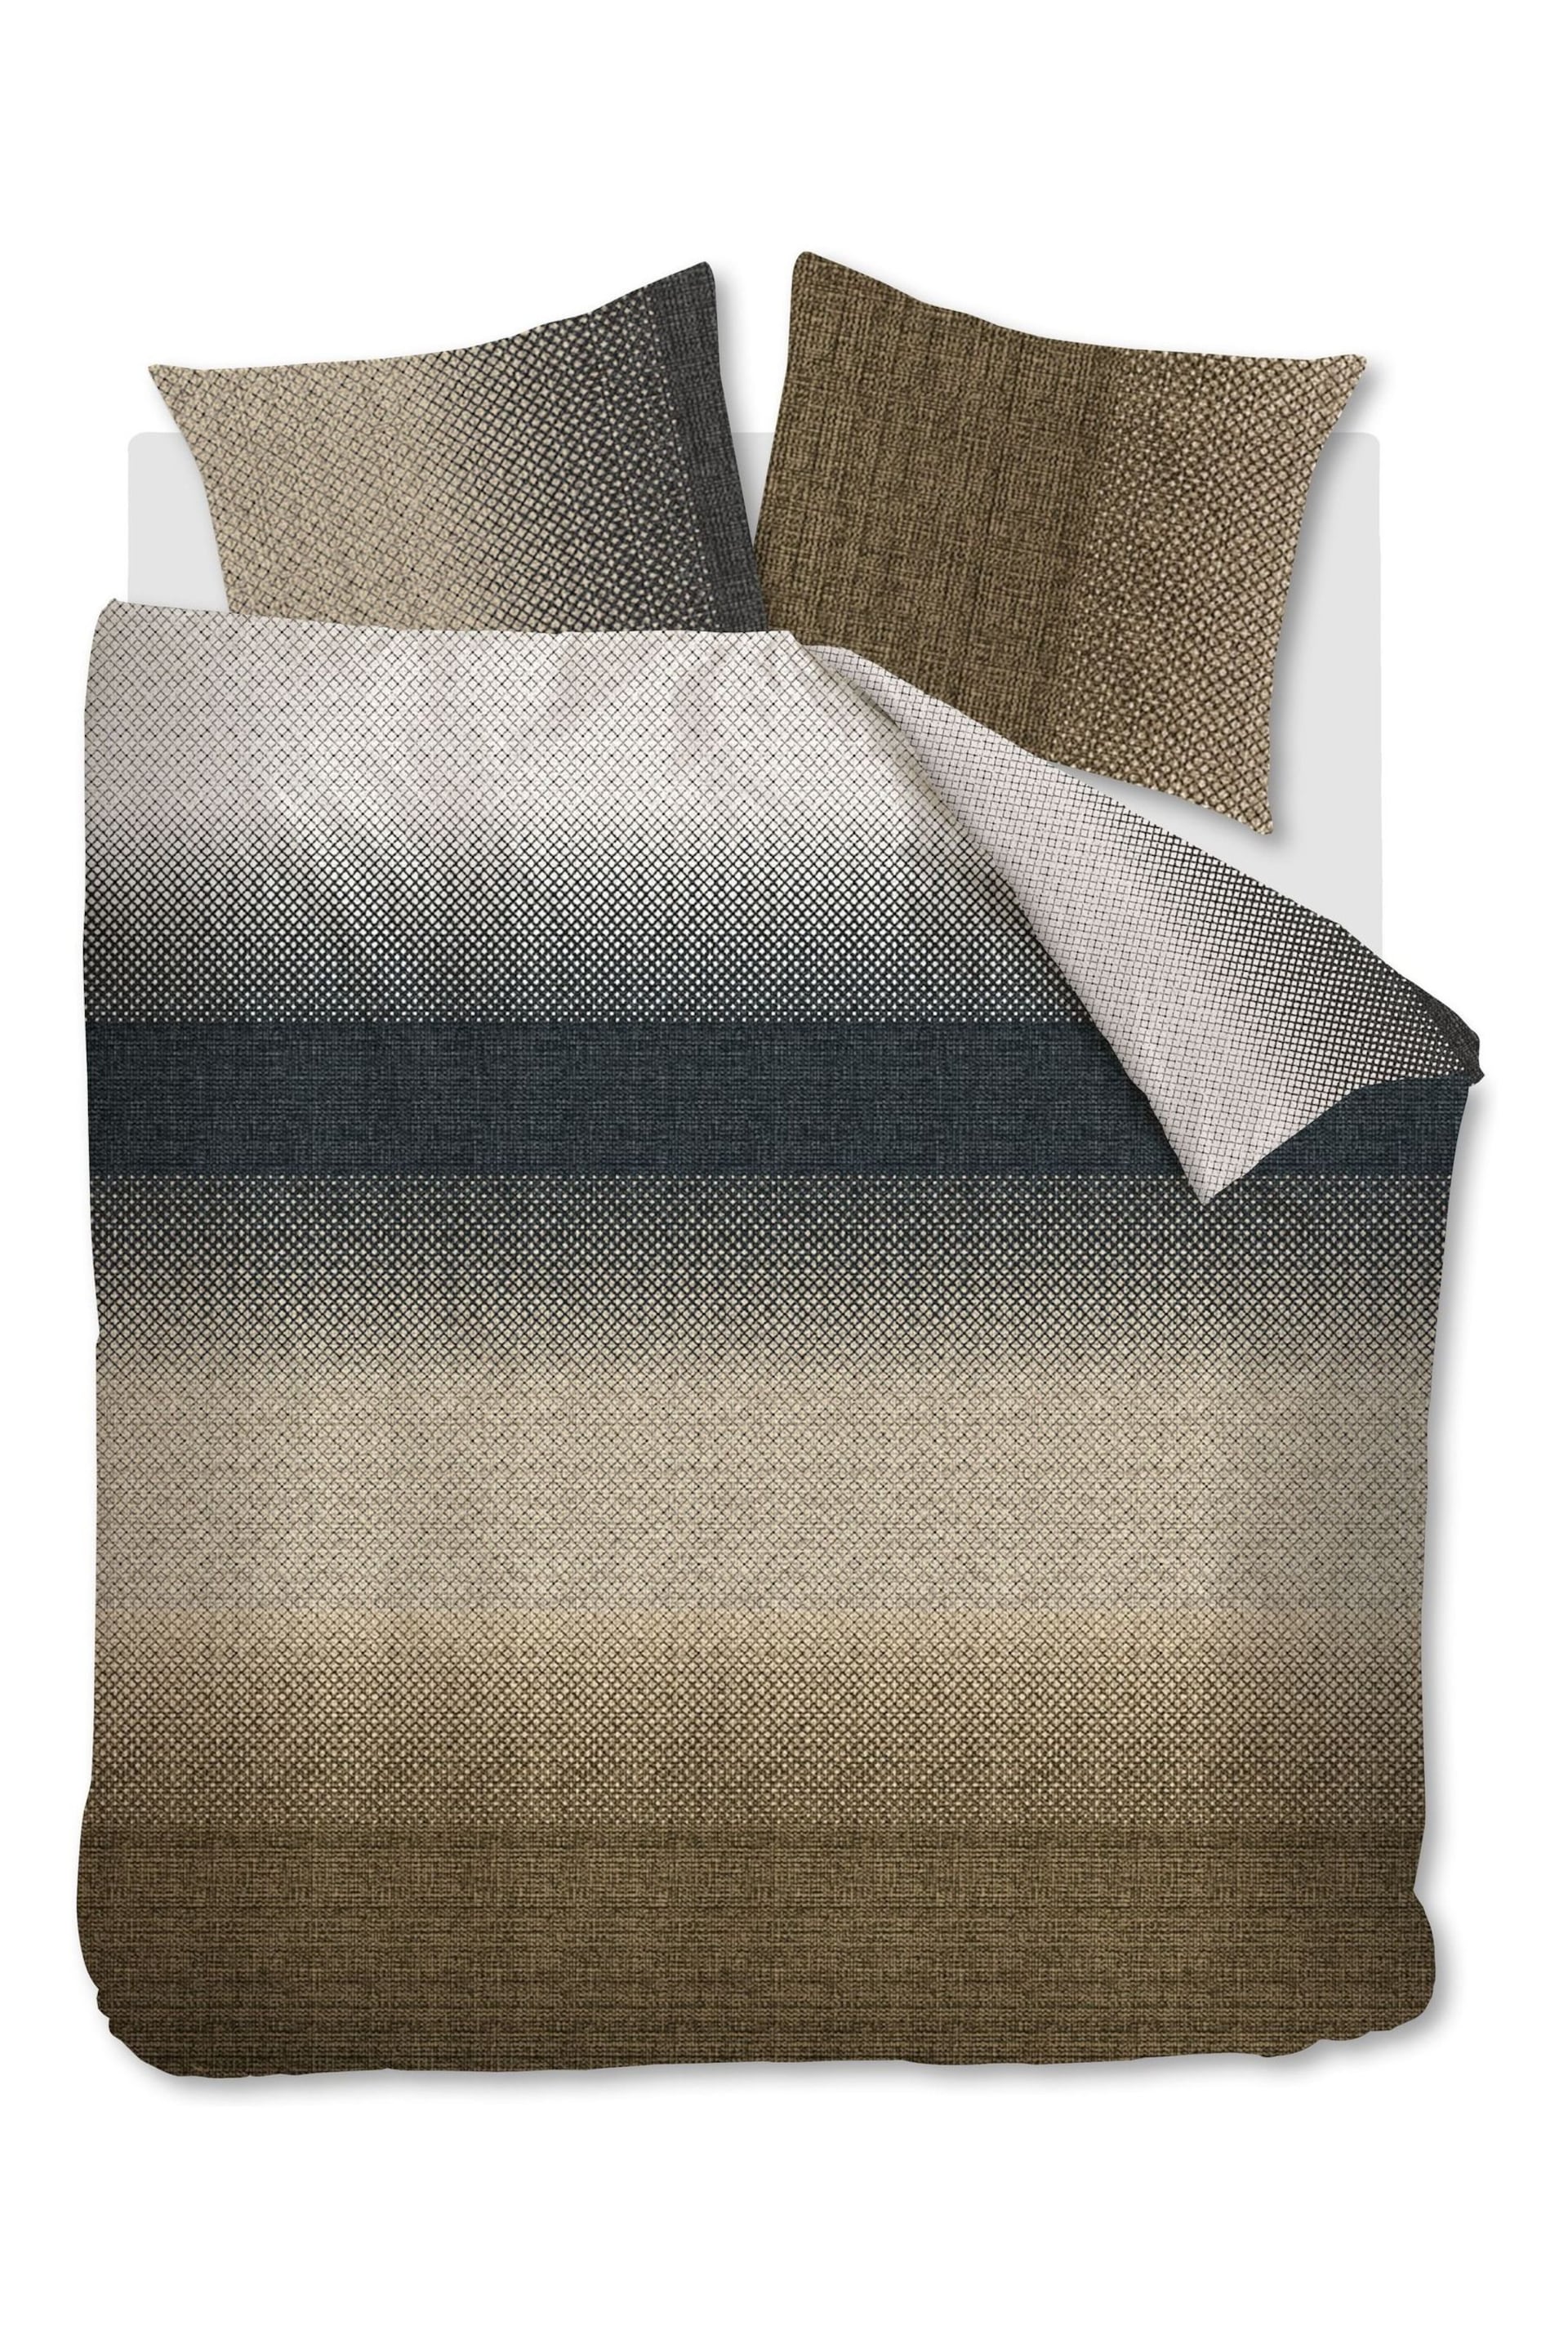 Beddinghouse Anthracite Duco Duvet Cover Set - Image 3 of 3